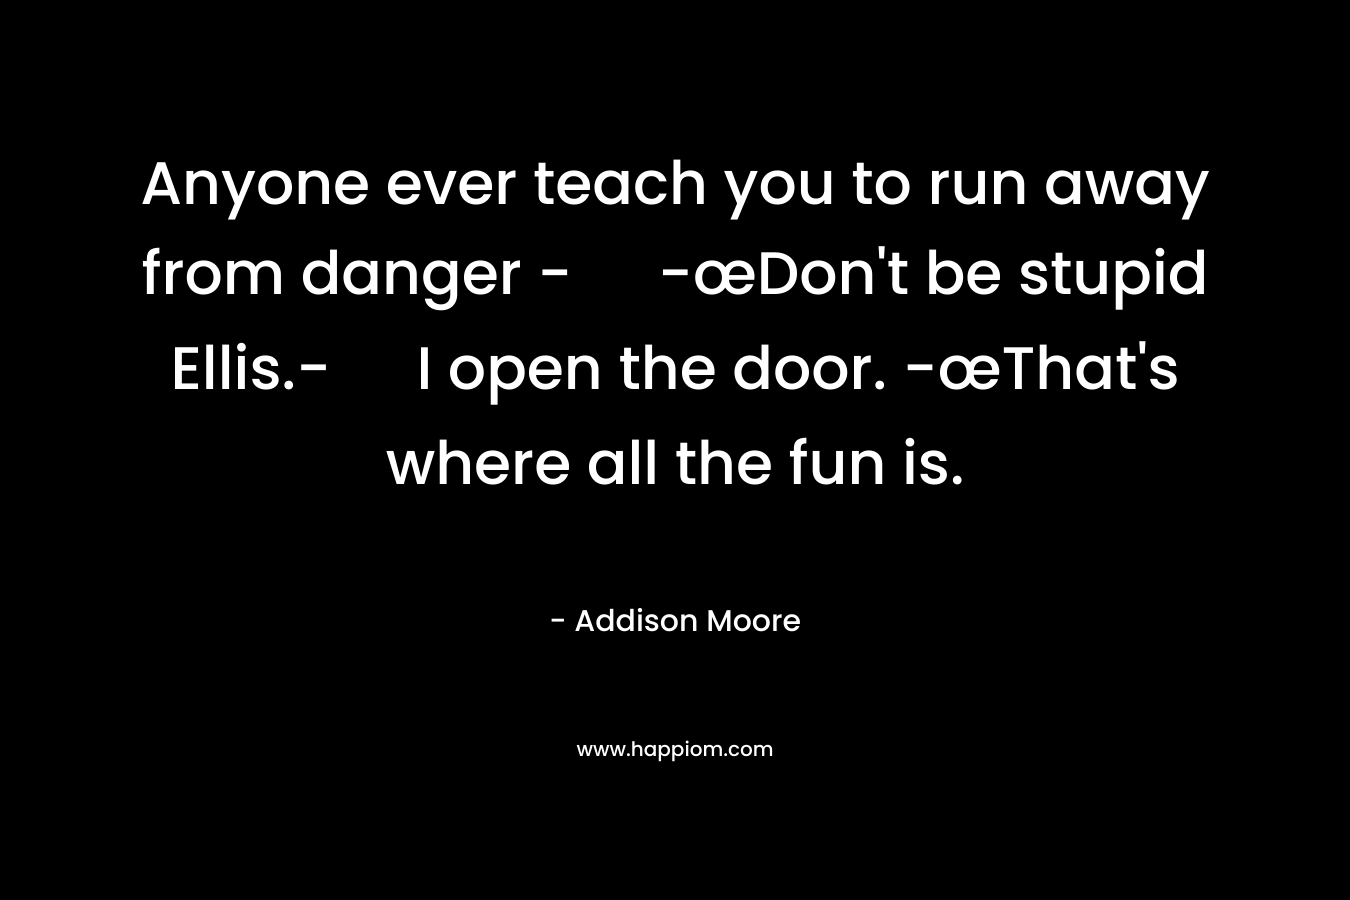 Anyone ever teach you to run away from danger - -œDon't be stupid Ellis.- I open the door. -œThat's where all the fun is.